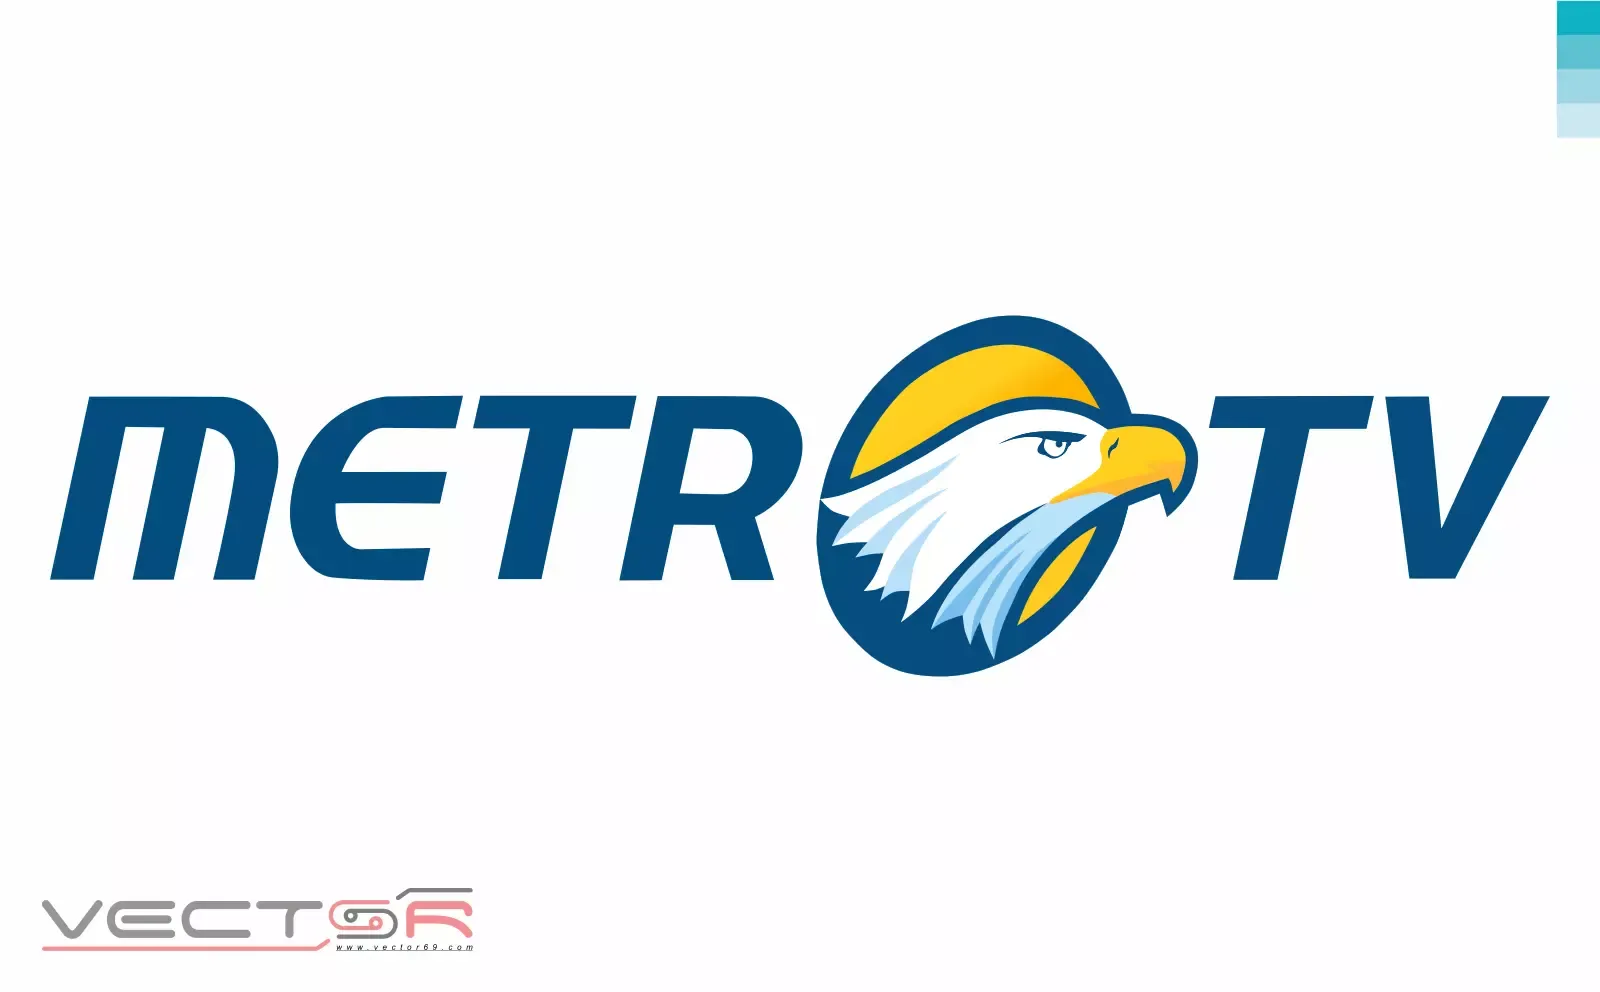 Metro TV (2010) Logo - Download Vector File SVG (Scalable Vector Graphics)